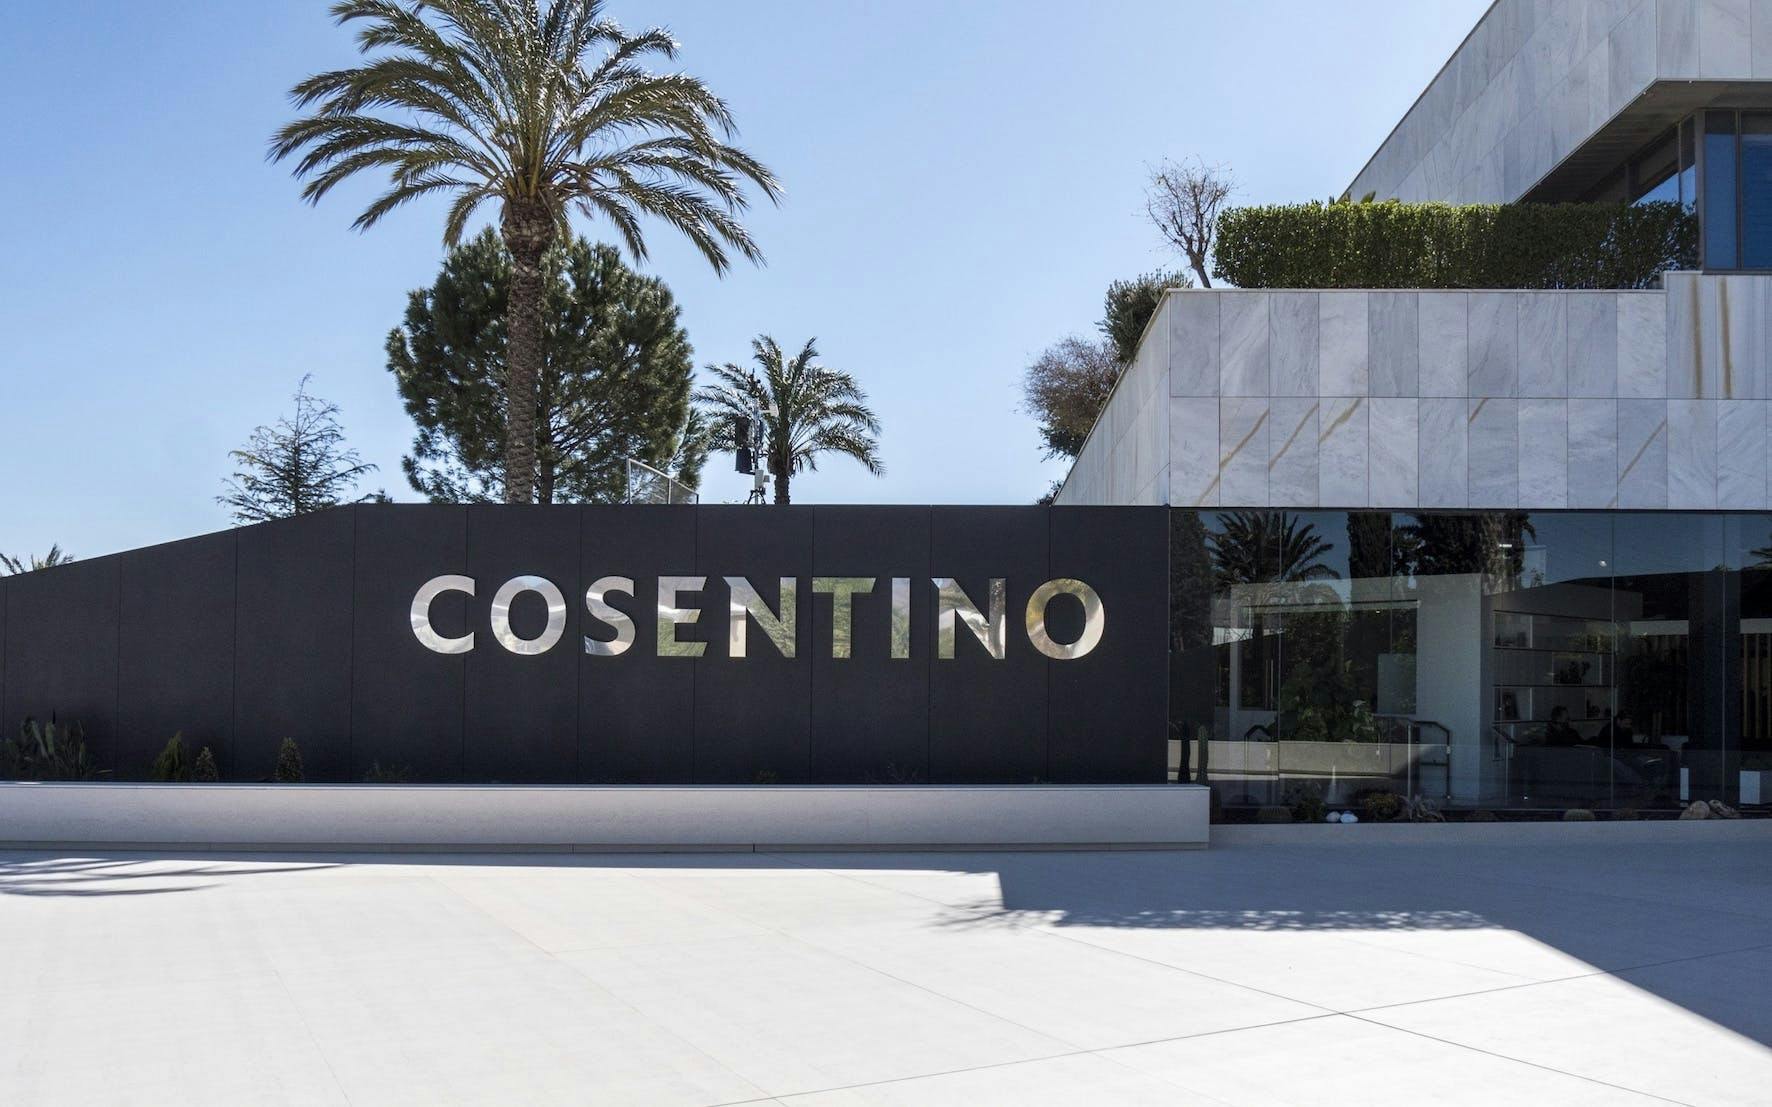 Image 31 of Entrada HQ Cosentino 1 8 in Cosentino Group reports strong results in 2020 - Cosentino